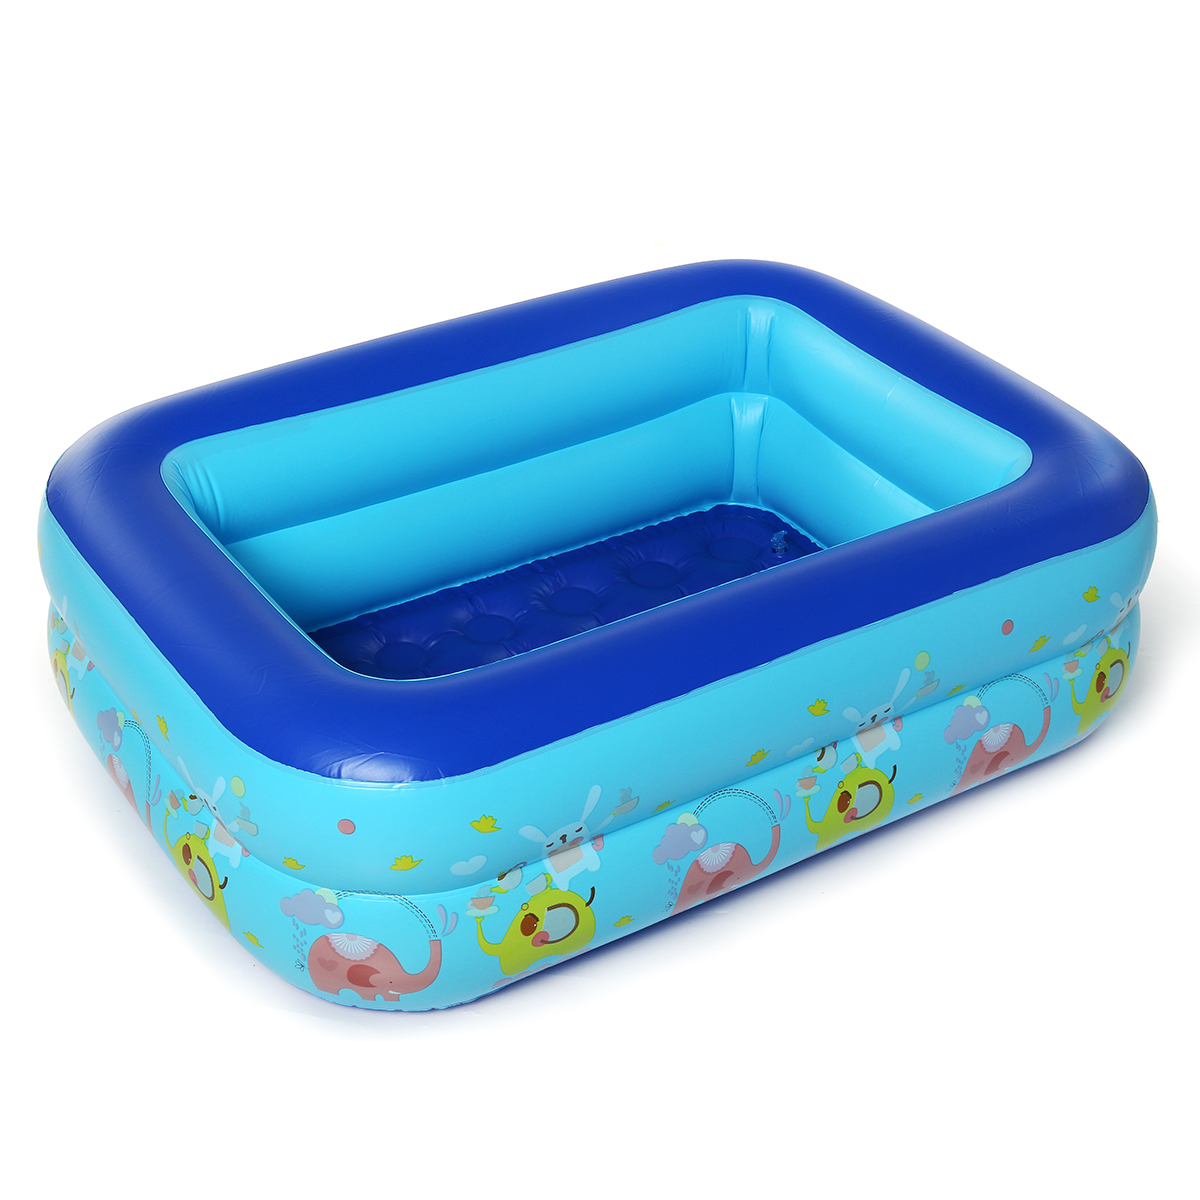 120130150CM-Inflatable-Swimming-Pool-Kids-Adult-Summer-Bathtub-PVC-Family-Water-Toy-1813651-4